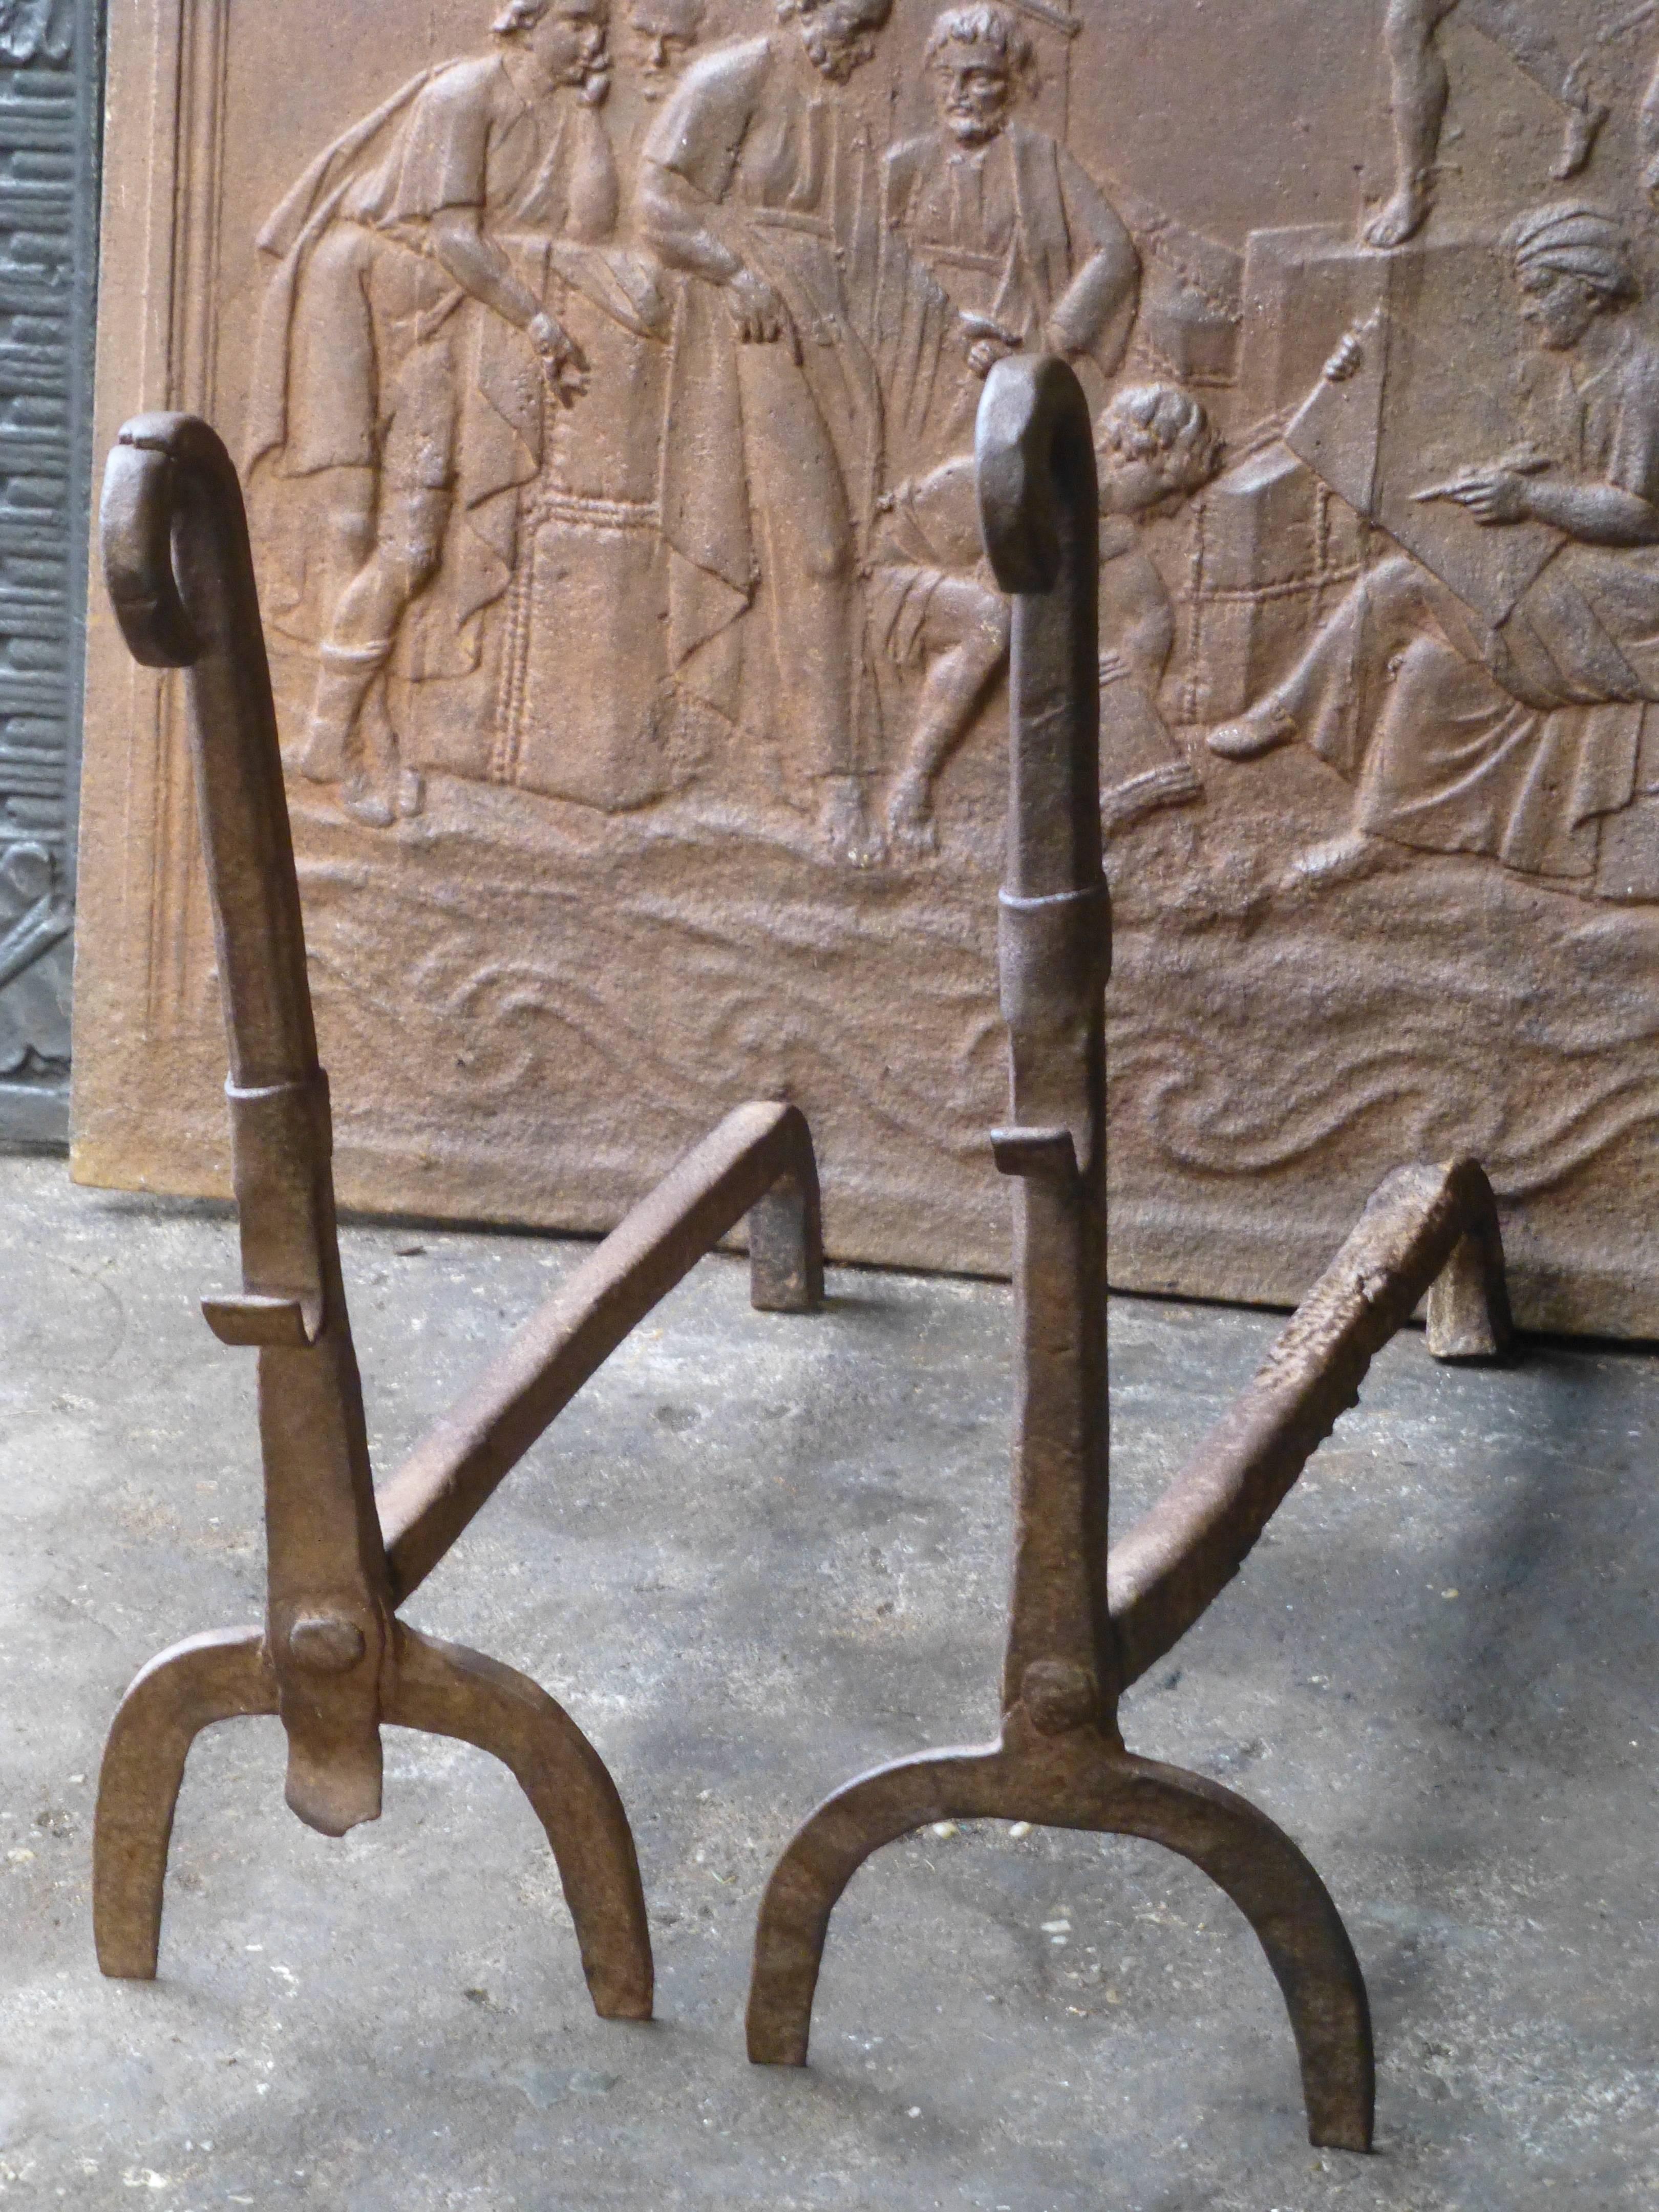 18th Century Horseshoe Andirons, Firedogs, made of wrought iron. The style of the andirons is Gothic. The condition is good.